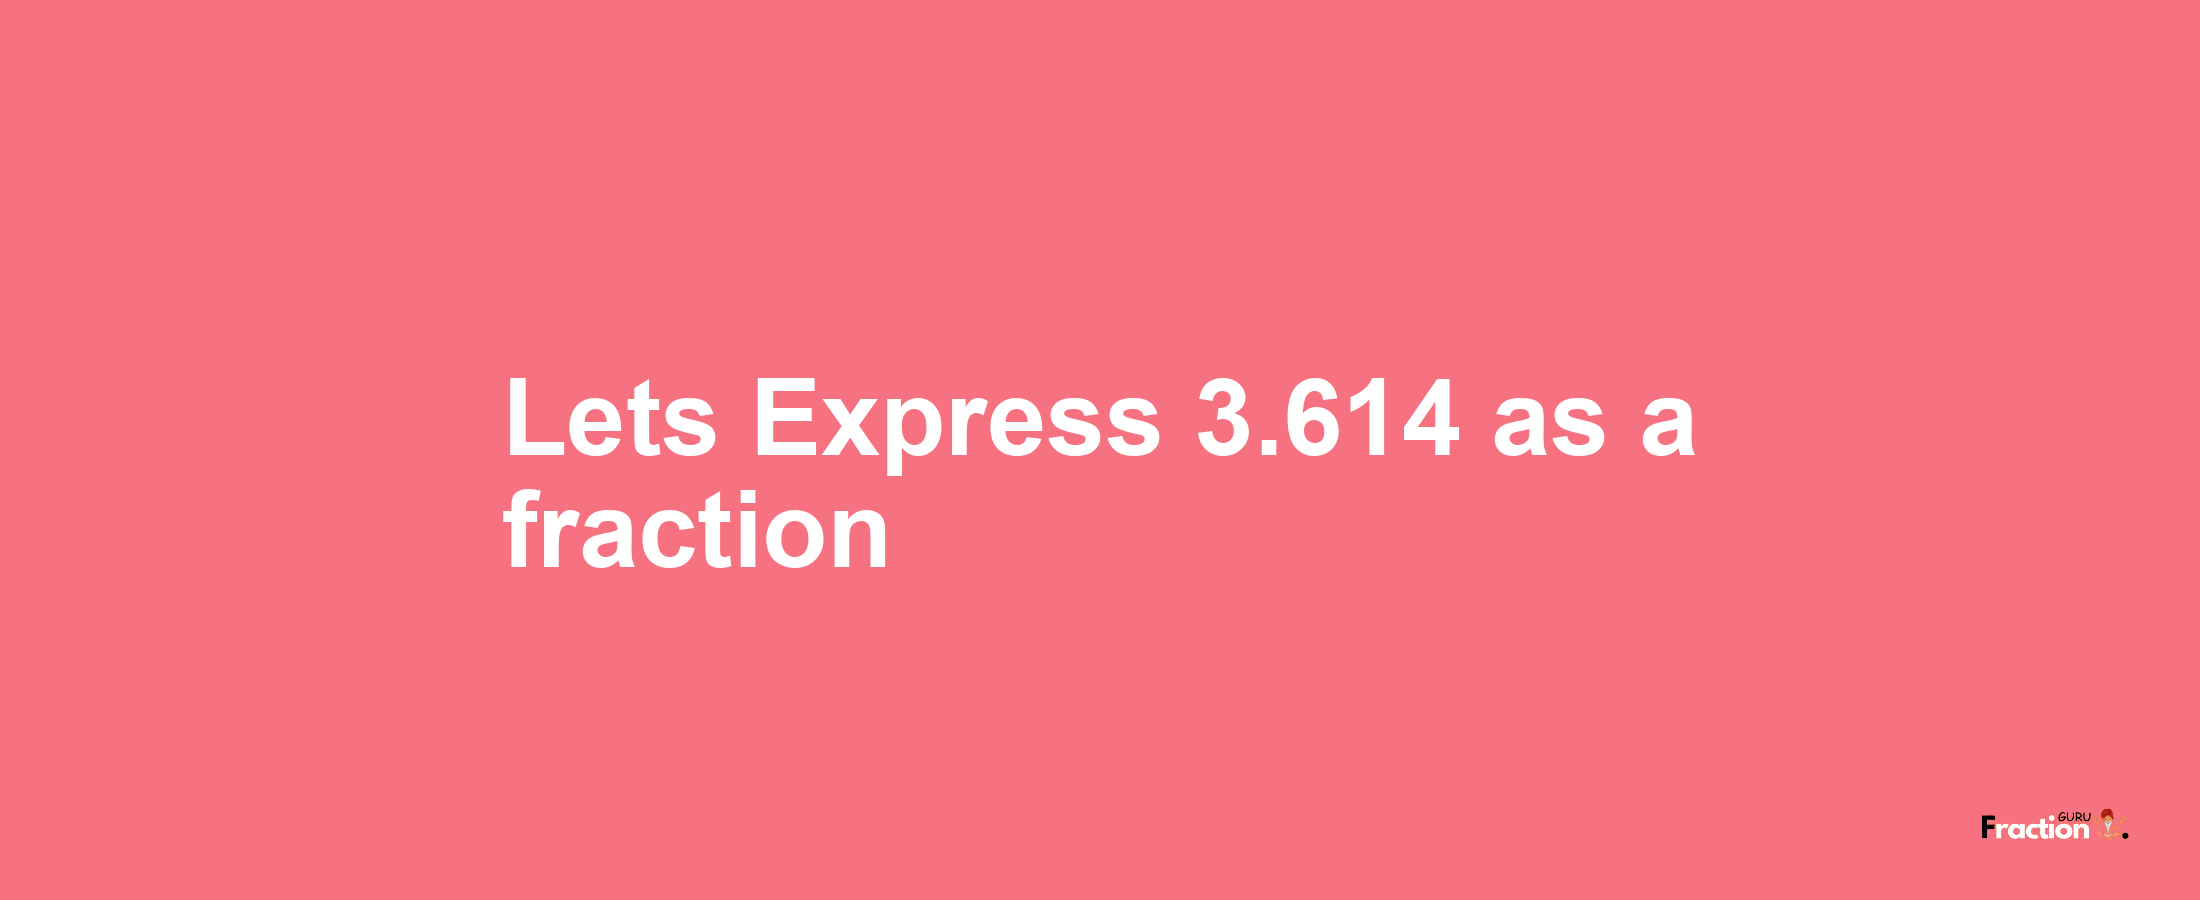 Lets Express 3.614 as afraction